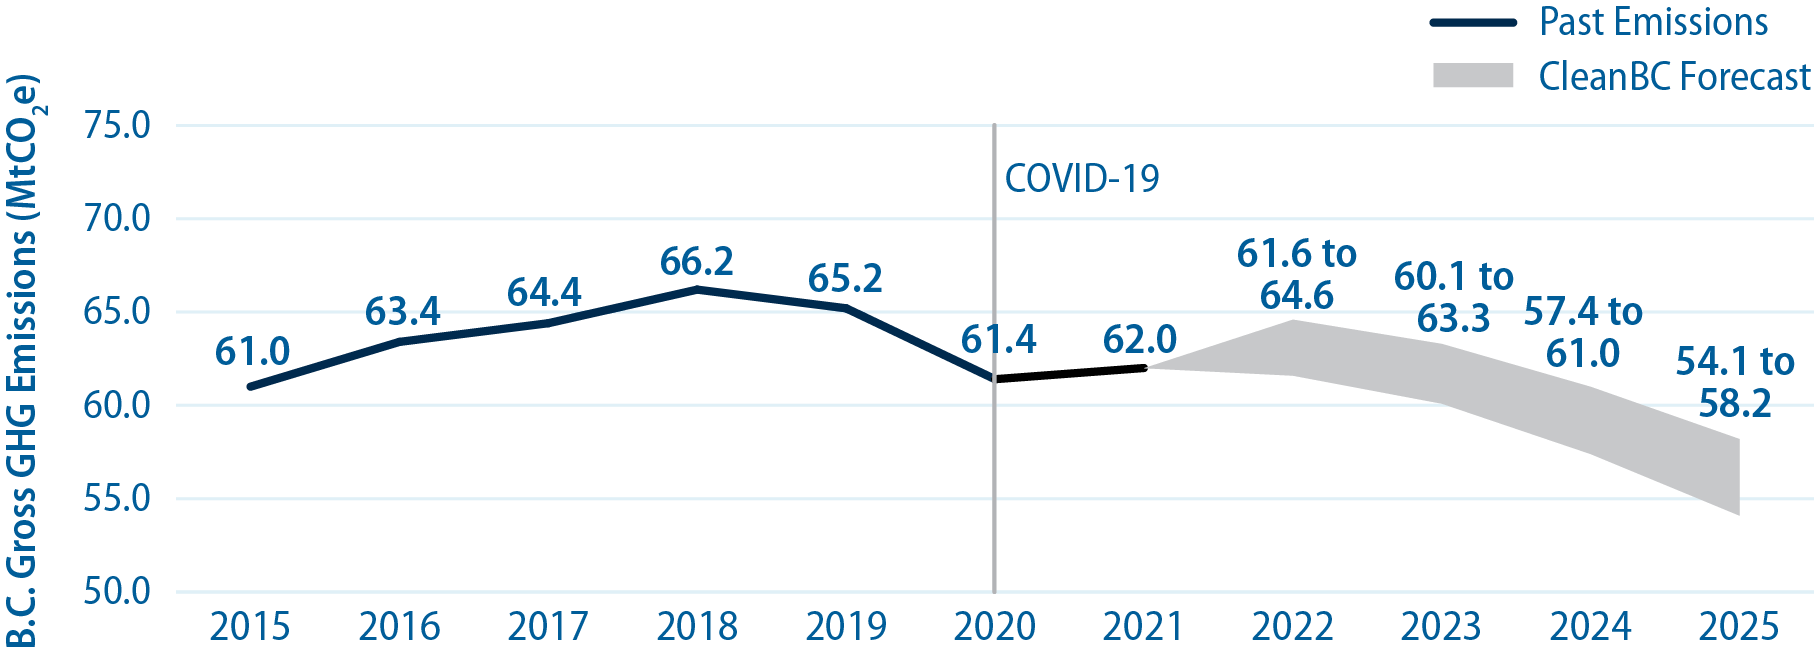 GHG emissions forecast 2021 to 2025